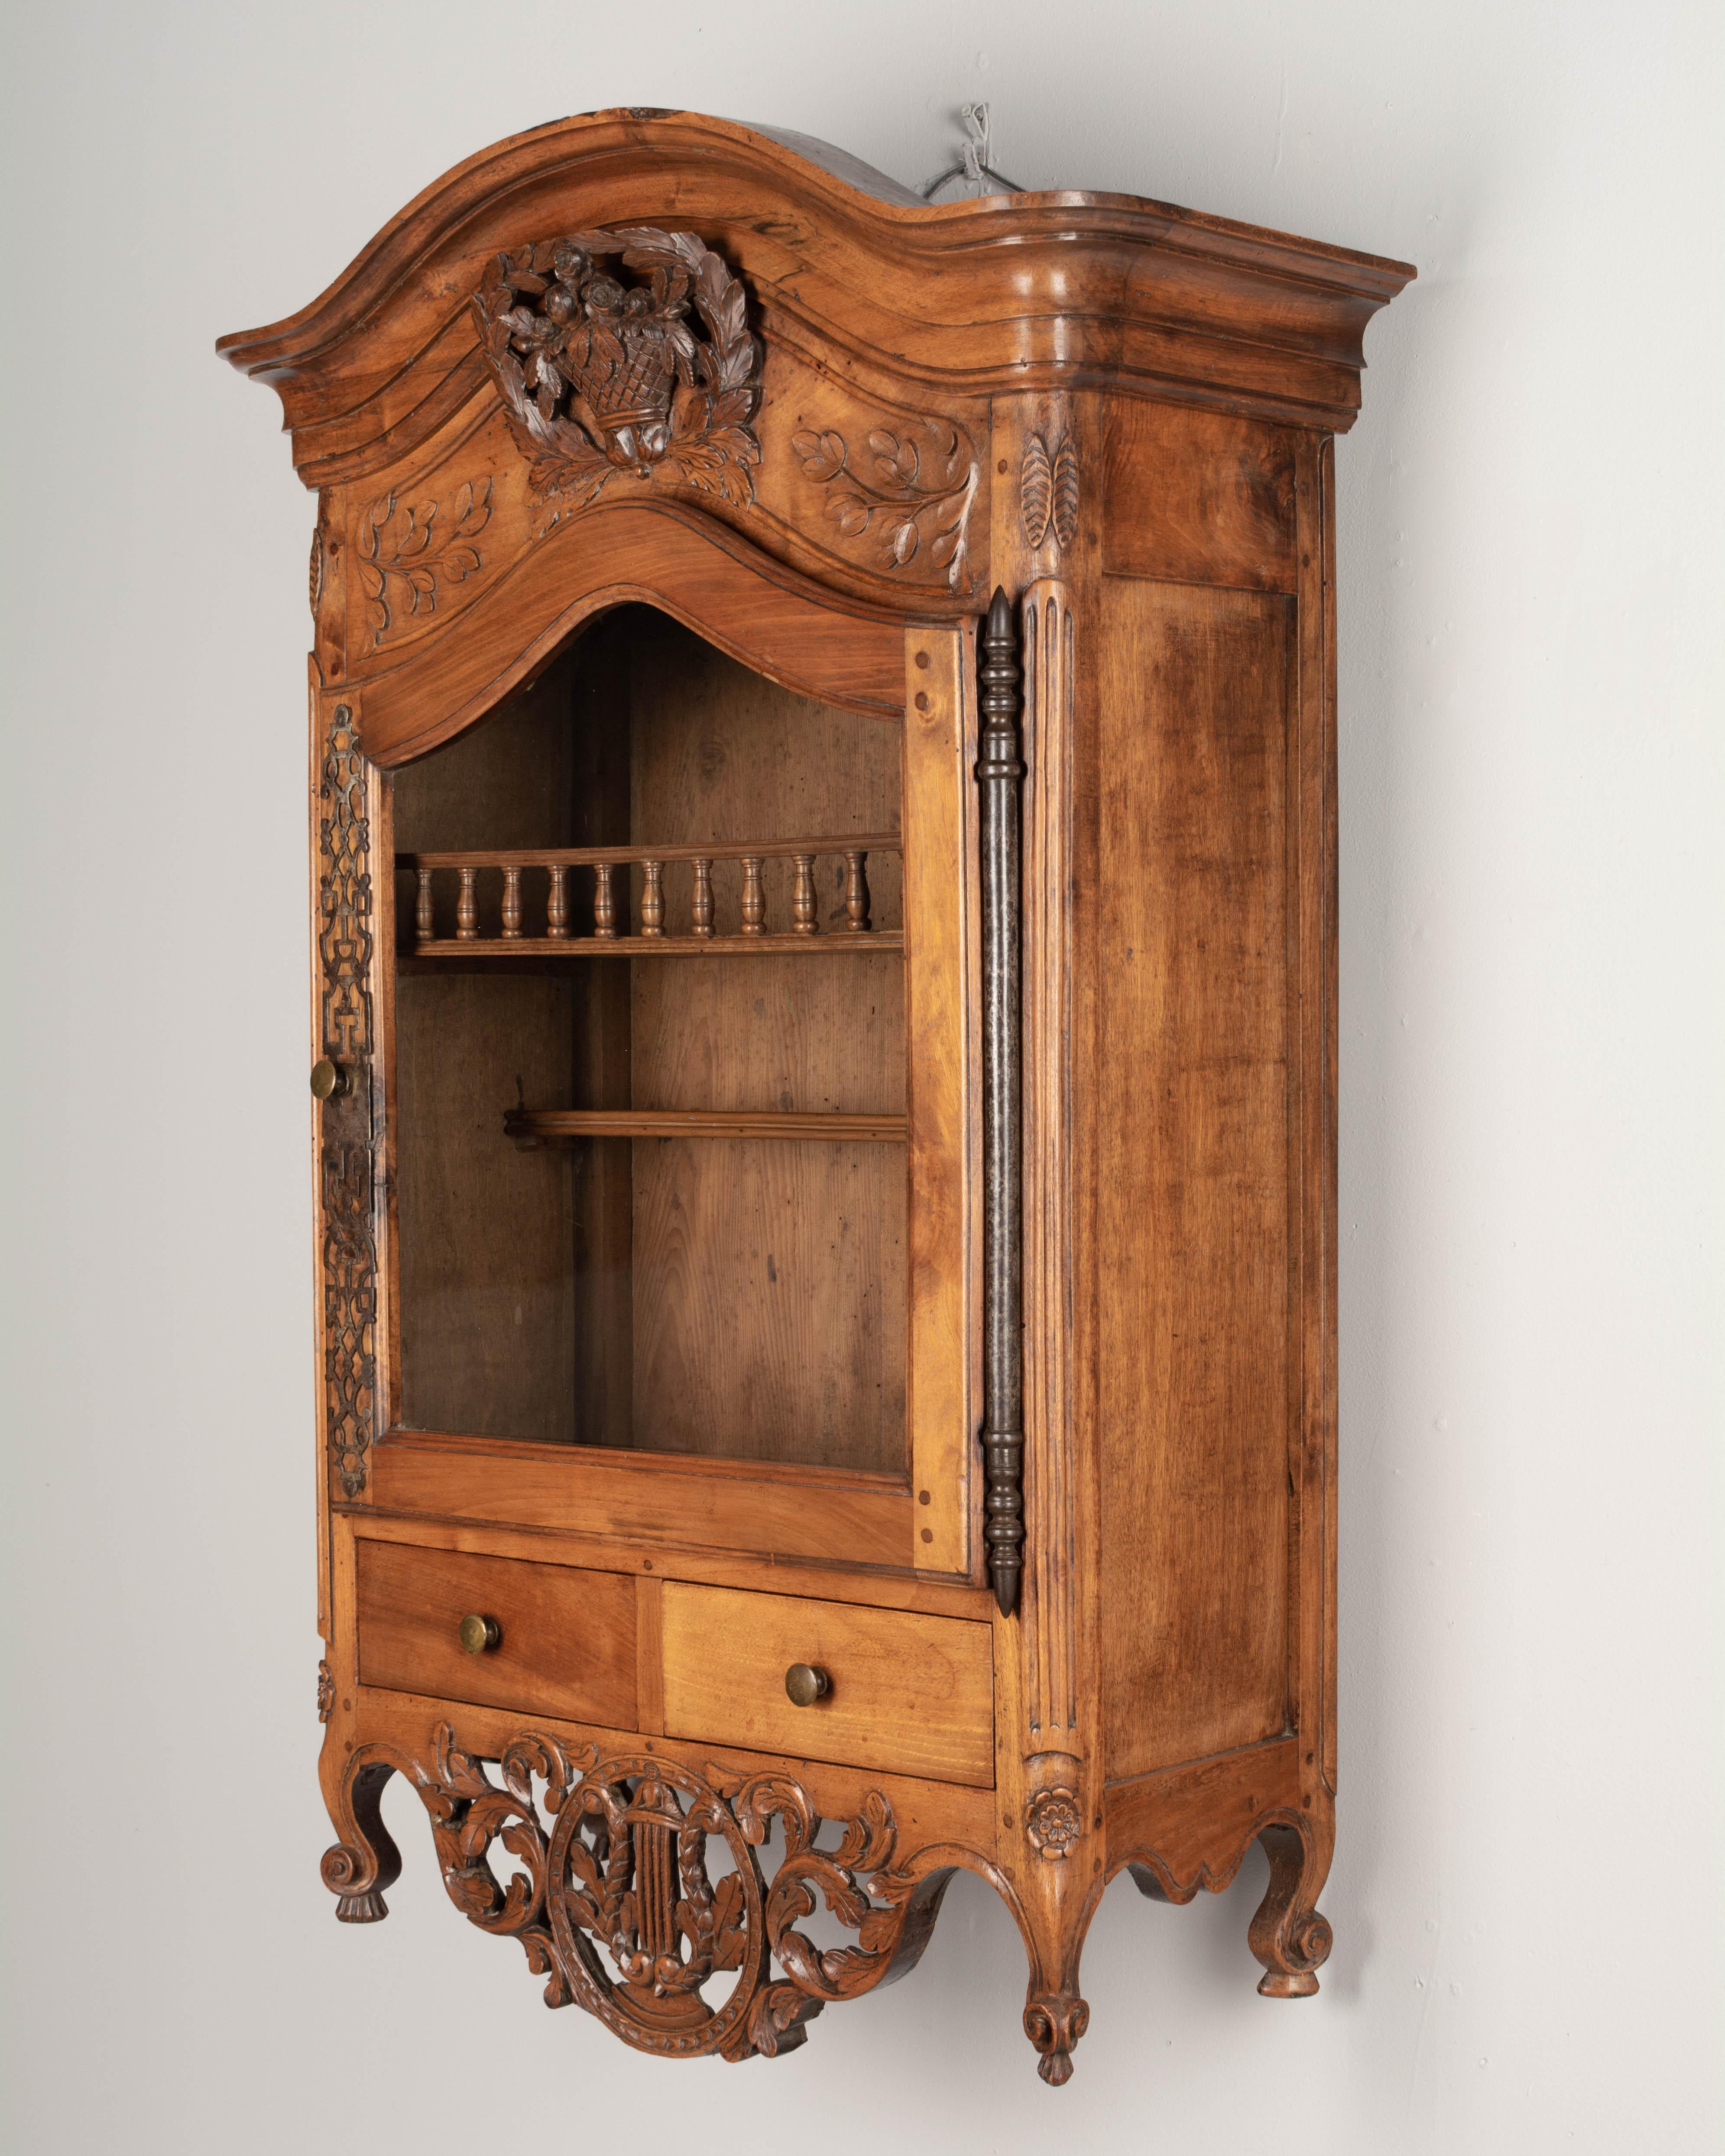 Hand-Carved 18th Century French Provencal Verrio or Wall Cabinet For Sale